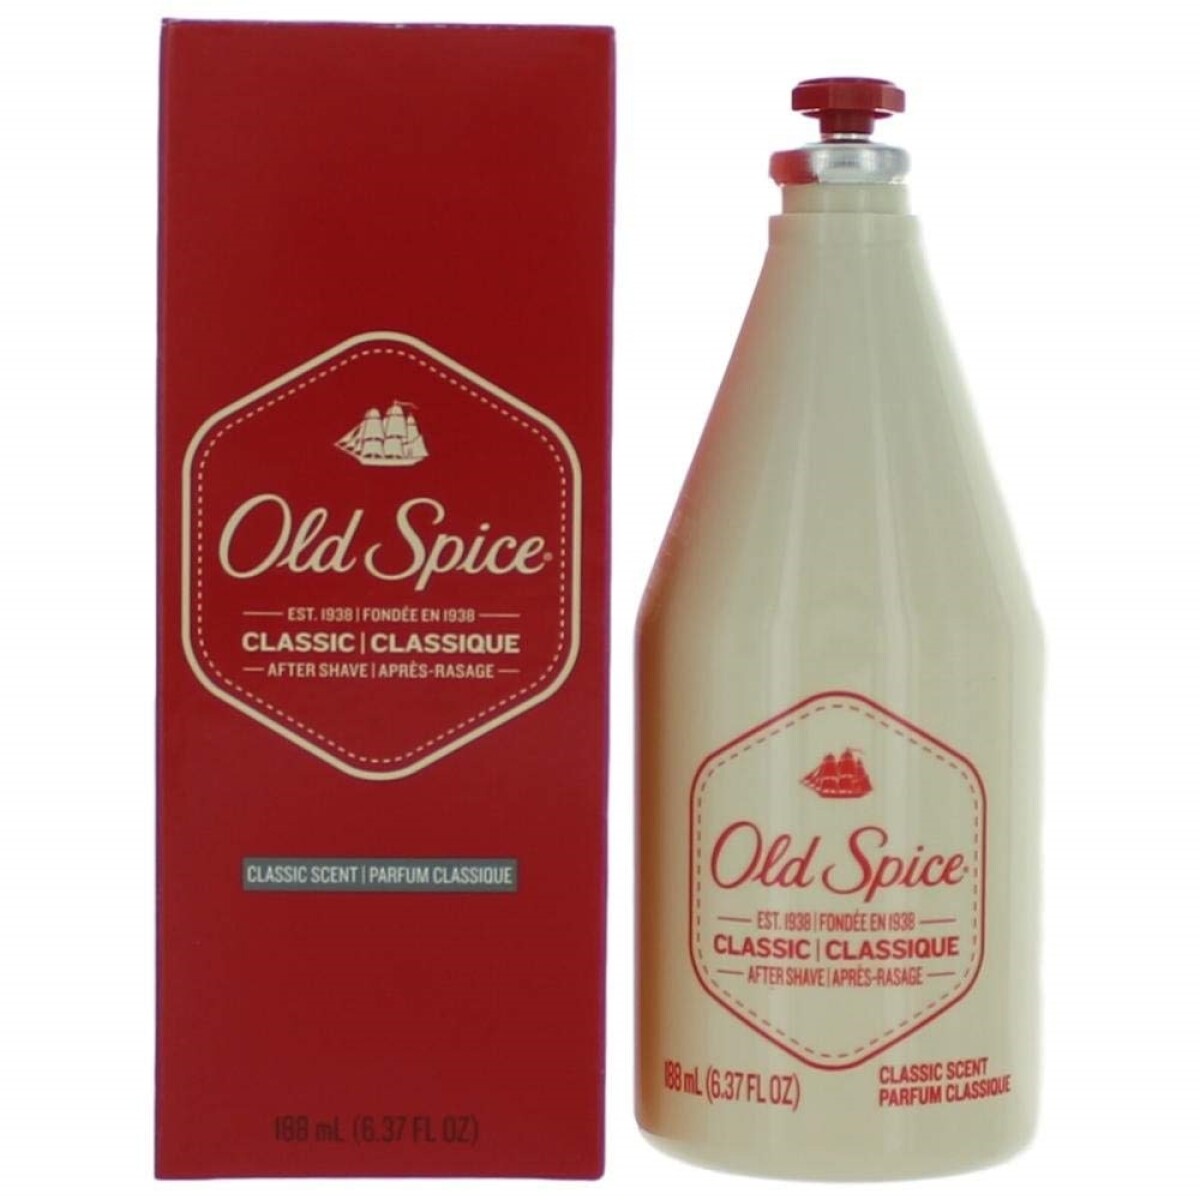 After Shave Old Spice 